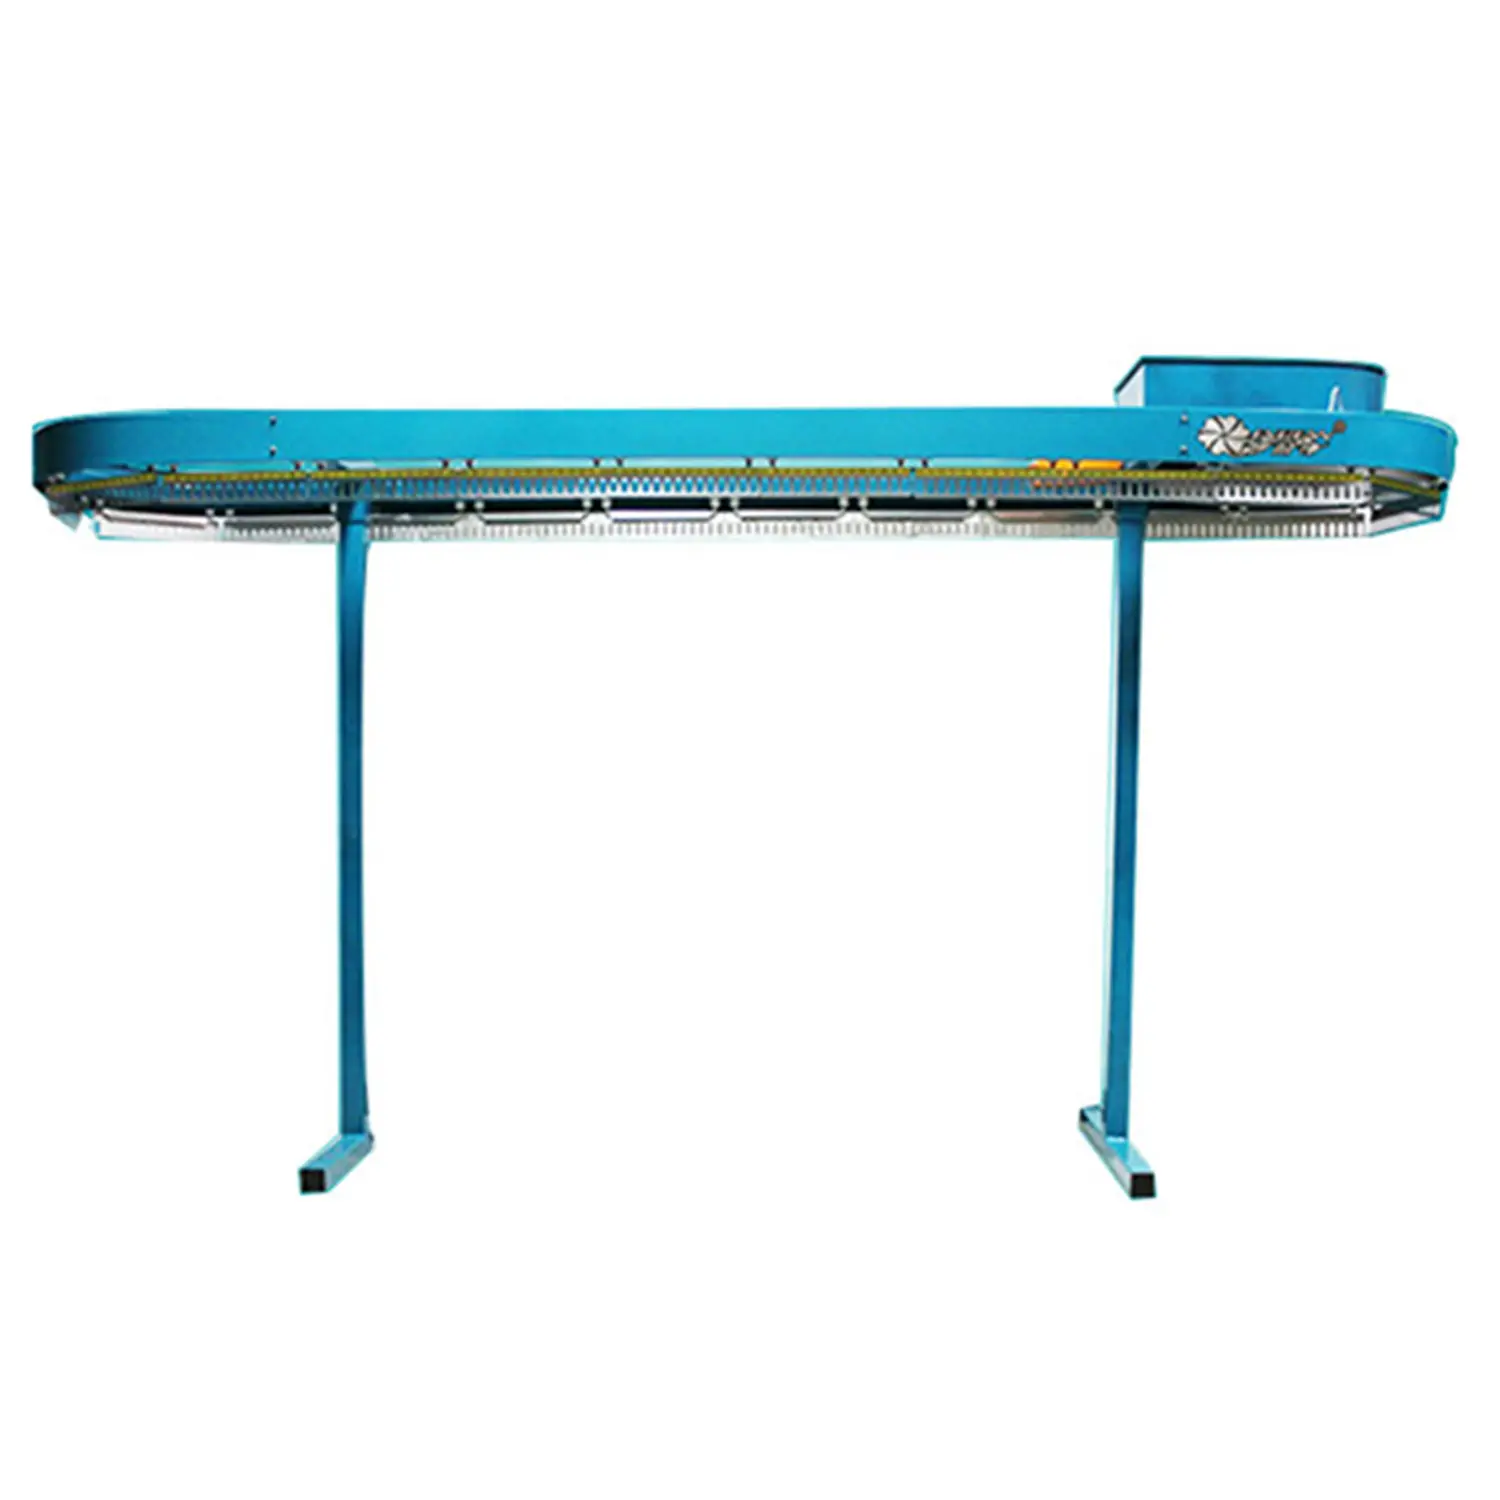 High quality clothes conveyor for laundry dry cleaning shop (dress taking line)